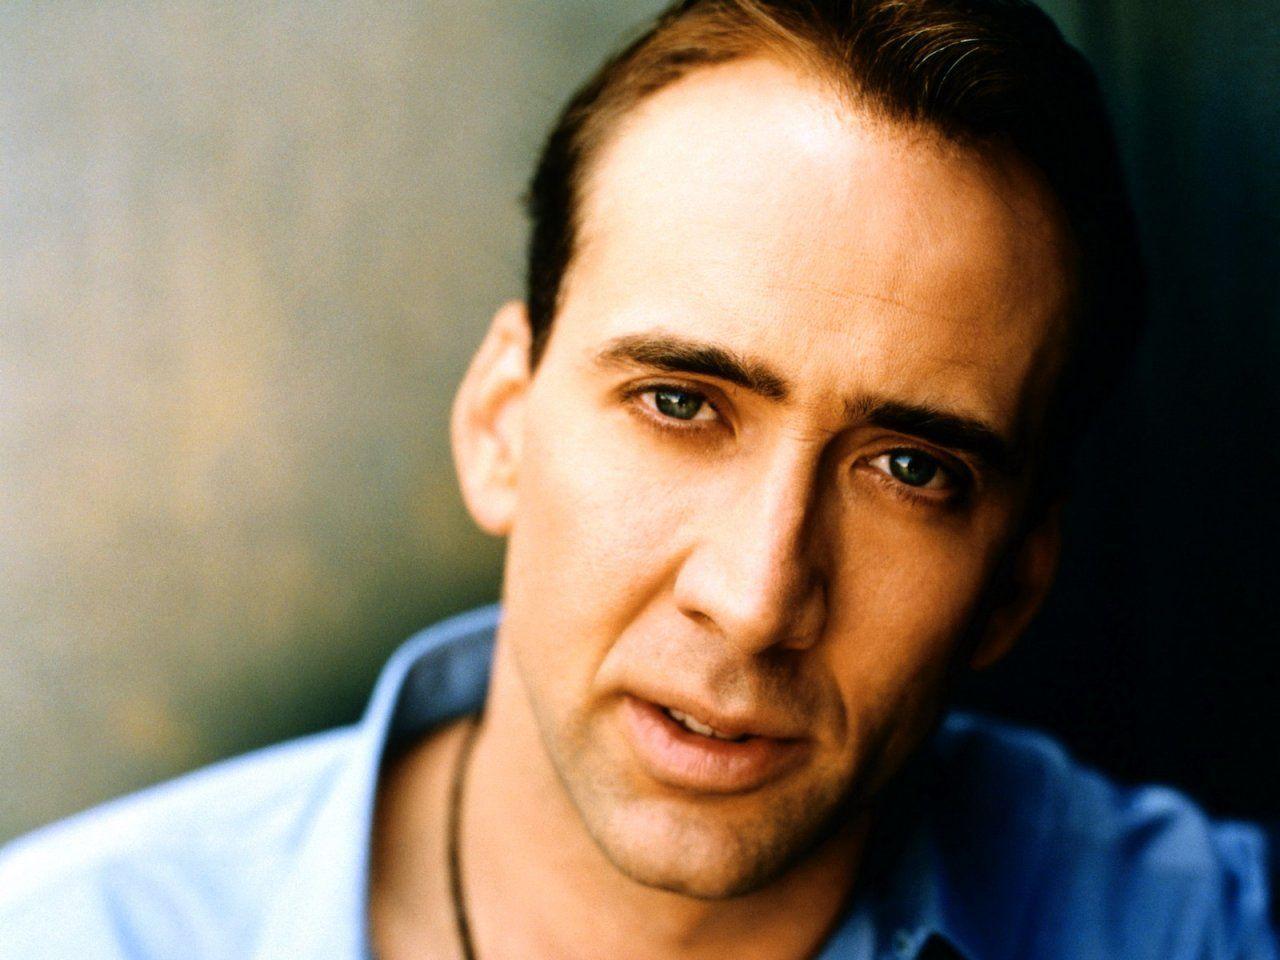 Nicolas Cage HD Wallpaper Free Download HD WALLPAPERS FREE DOWNLOAD